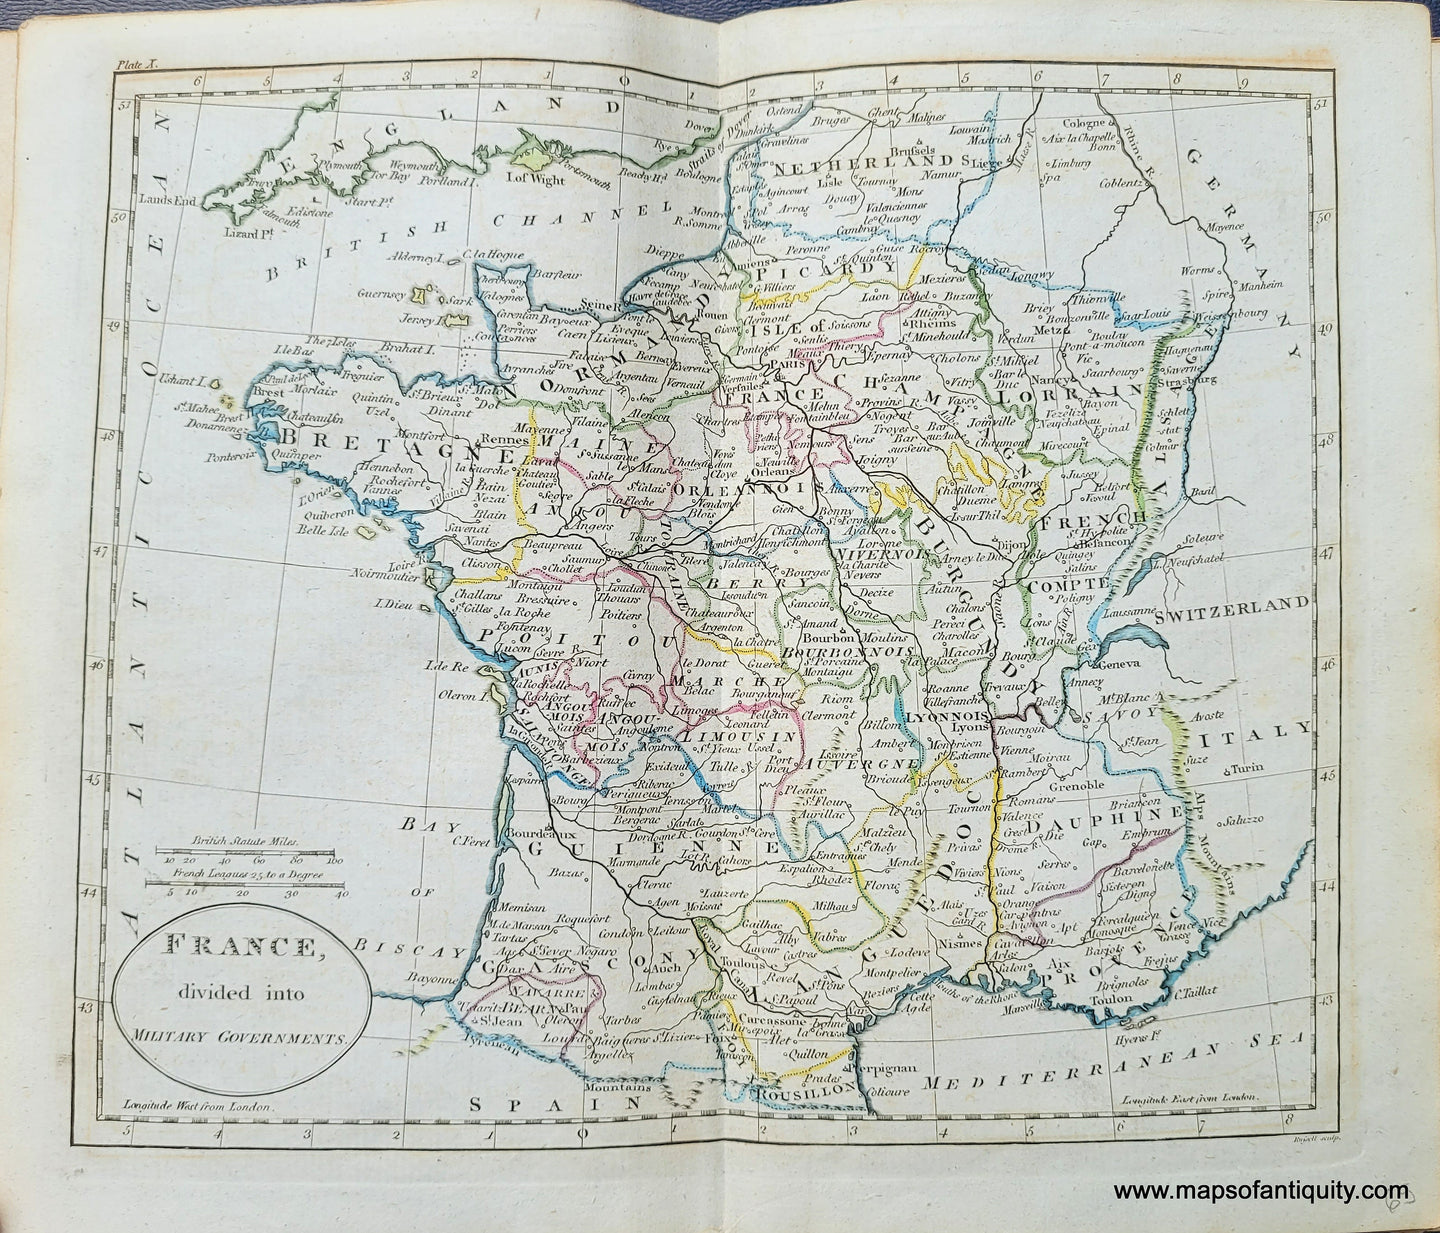 Genuine-Antique-Map-France-divided-into-Military-Governments-1800-Russell-Guthrie-Maps-Of-Antiquity